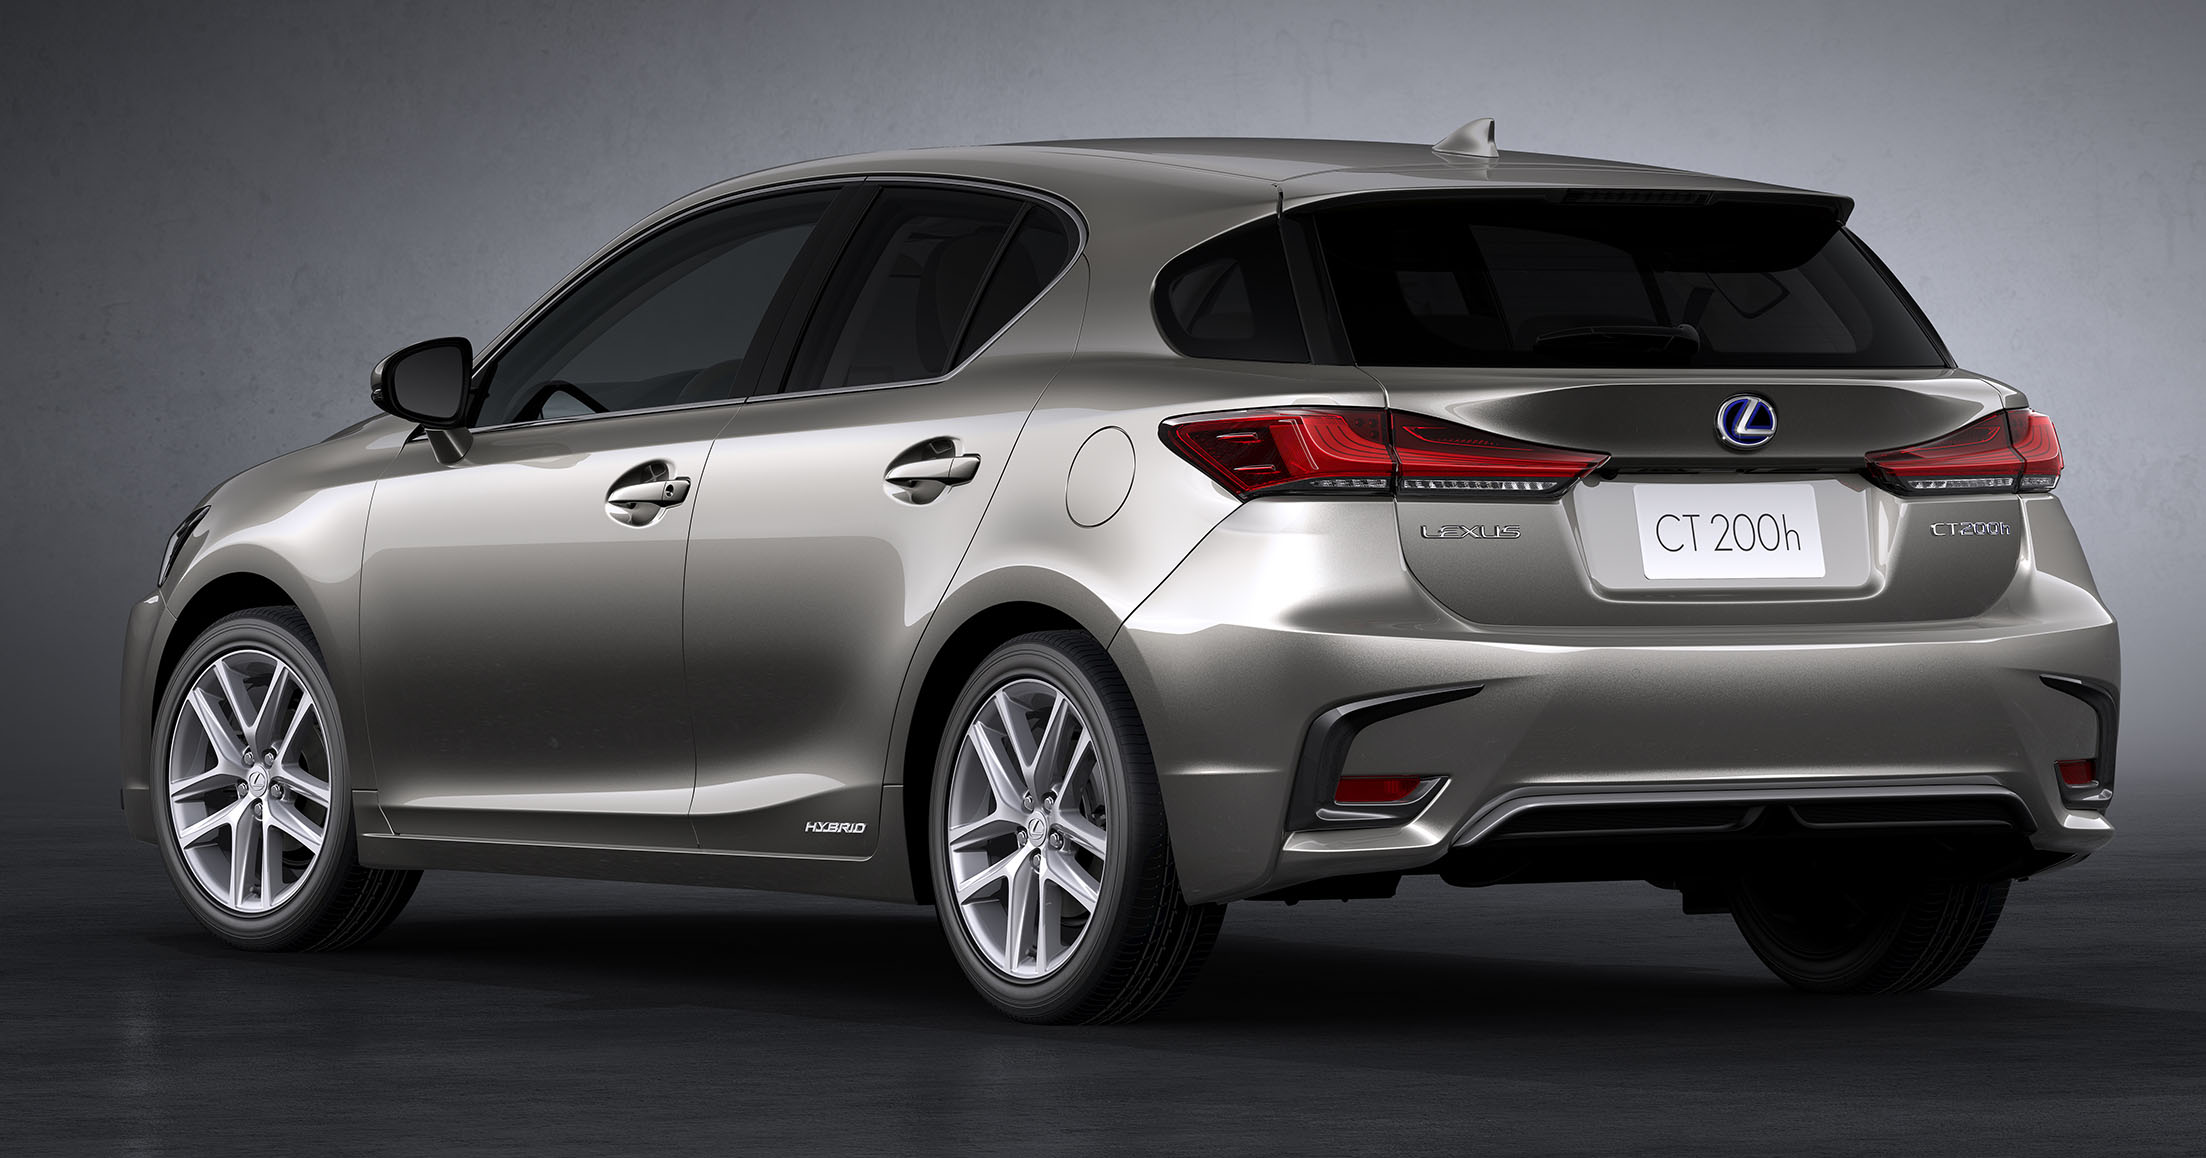 2018 Lexus CT 200h revealed with new styling, tech Paul